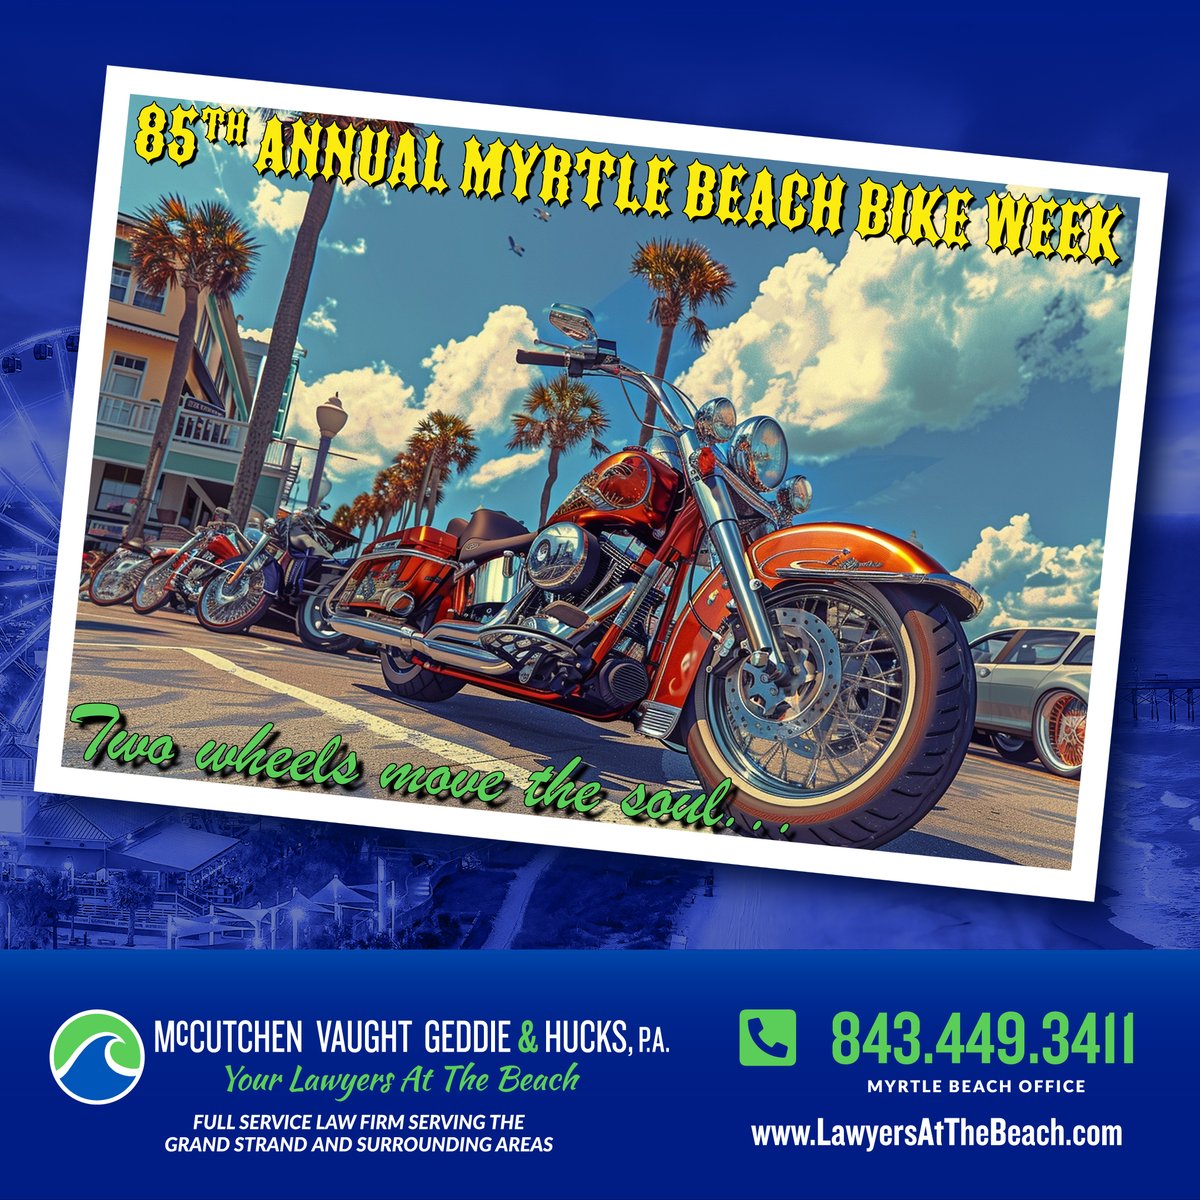 For decades, Myrtle Beach has been a haven for riders during Bike Week. But with the thrill comes responsibility. Whether you're cruising solo or with a pack, prioritize safety on the road. If you need legal guidance or support, our team is just a call away. Ride safe, friends.